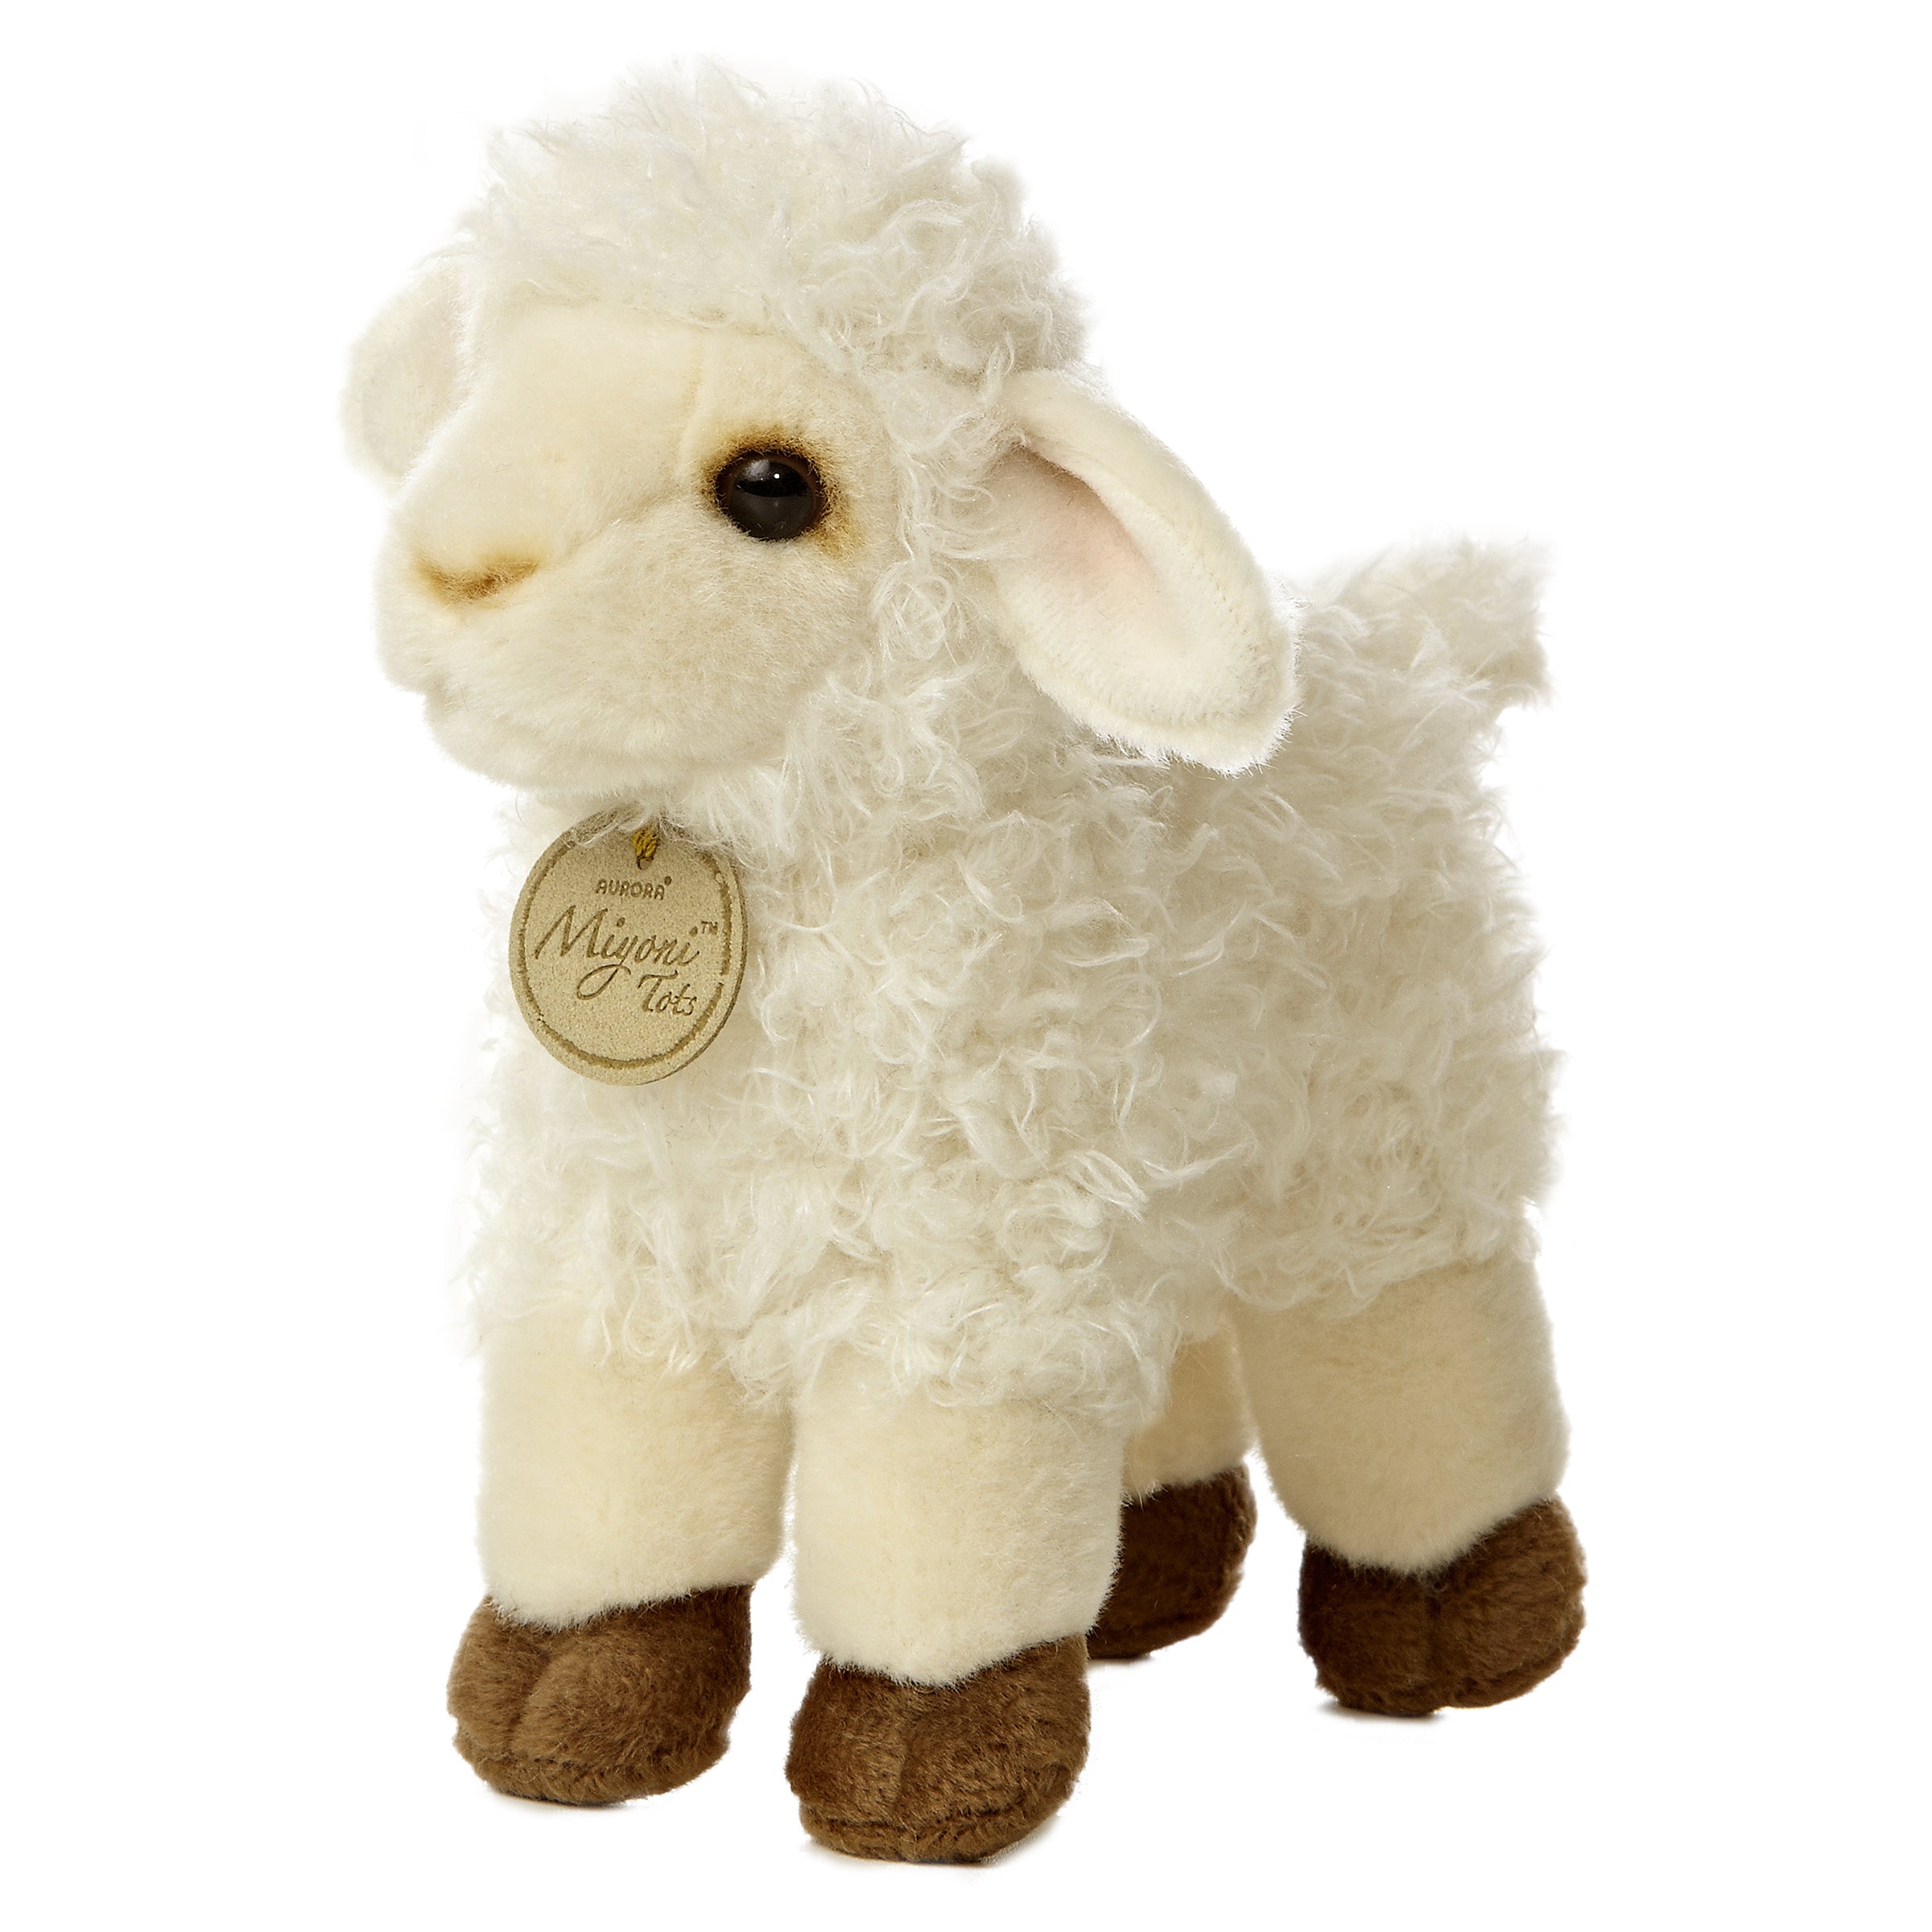 Top Five Cutest Easter Lambs! — My Sheep stuffed animals and a cleaning  caution – Best Stuffed Animals!